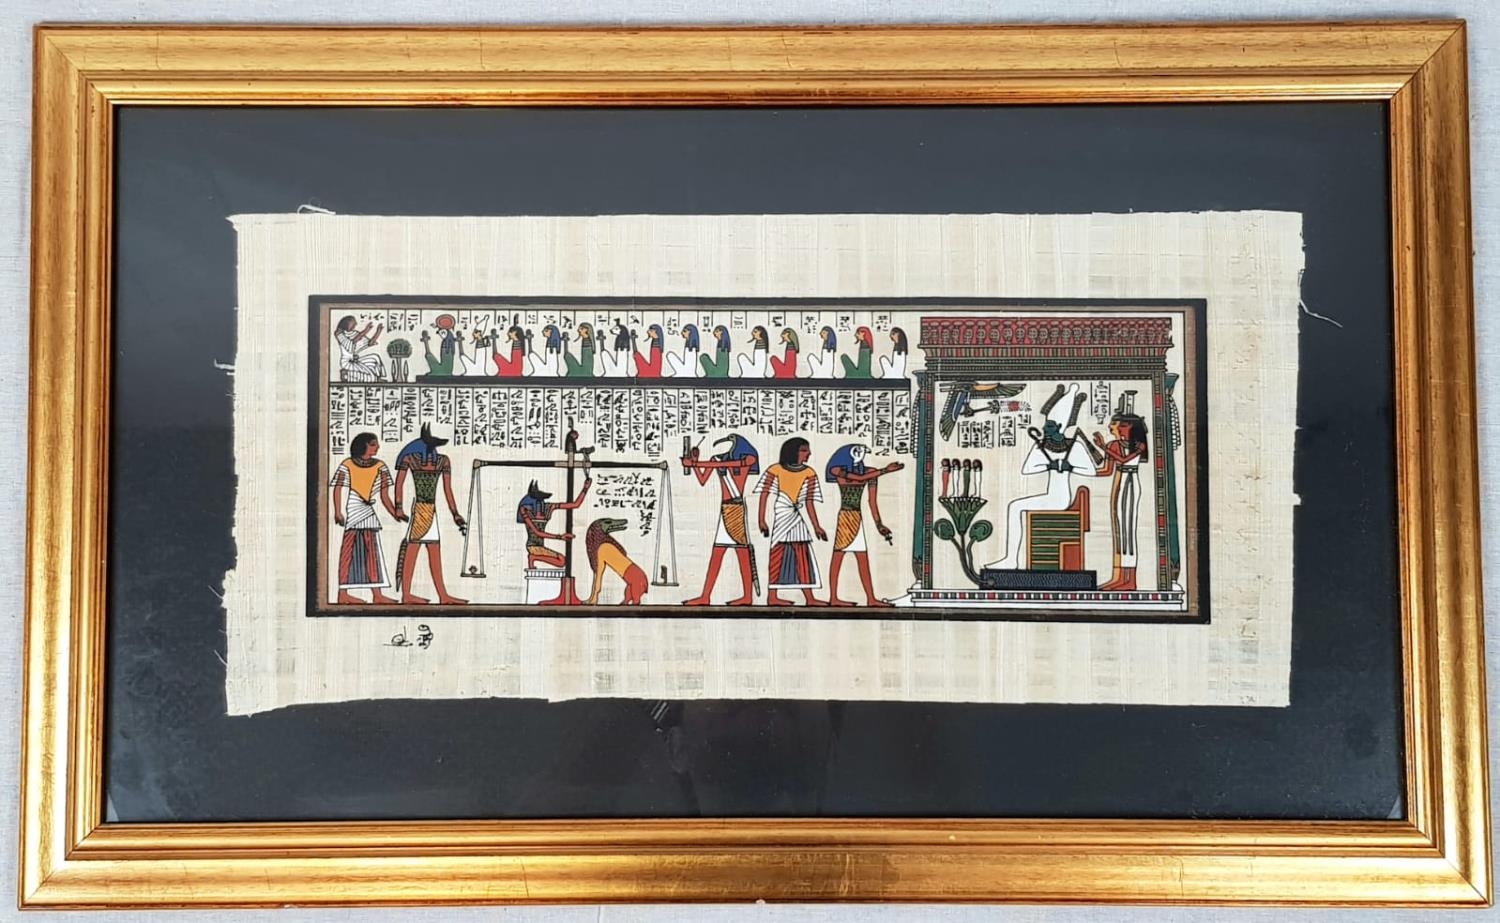 An Egyptian Painting on Papyrus. Signed by the Artist. Gilded Frame. 68 x 41cm.